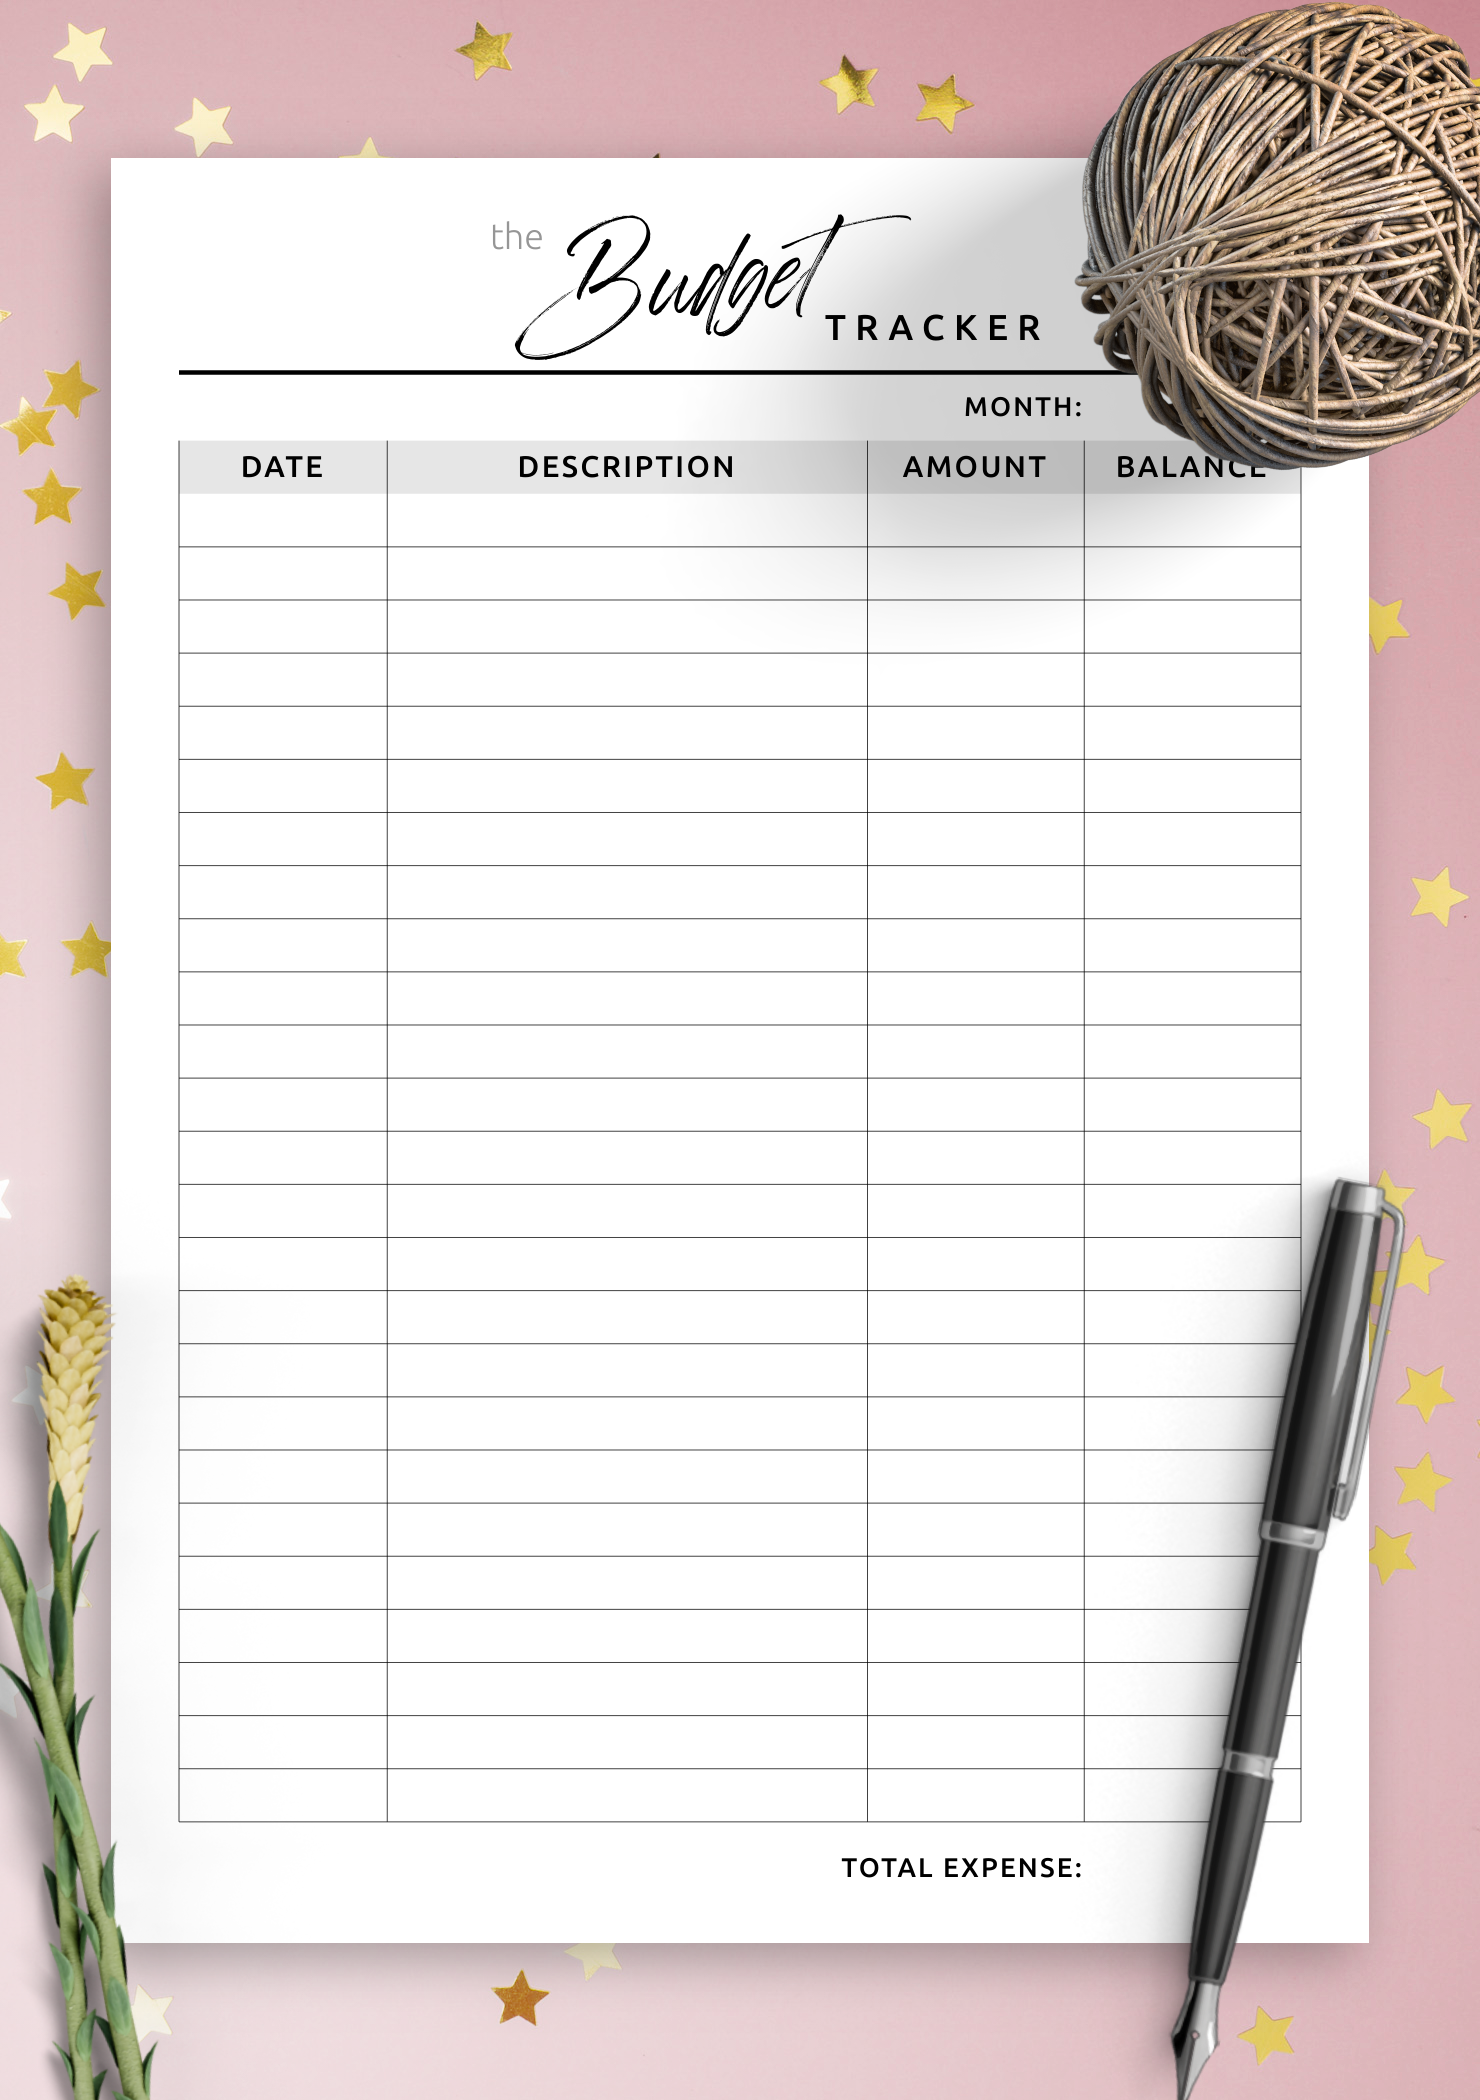 SIMPLE MONTHLY Budget Planner Printable, Financial Tracker